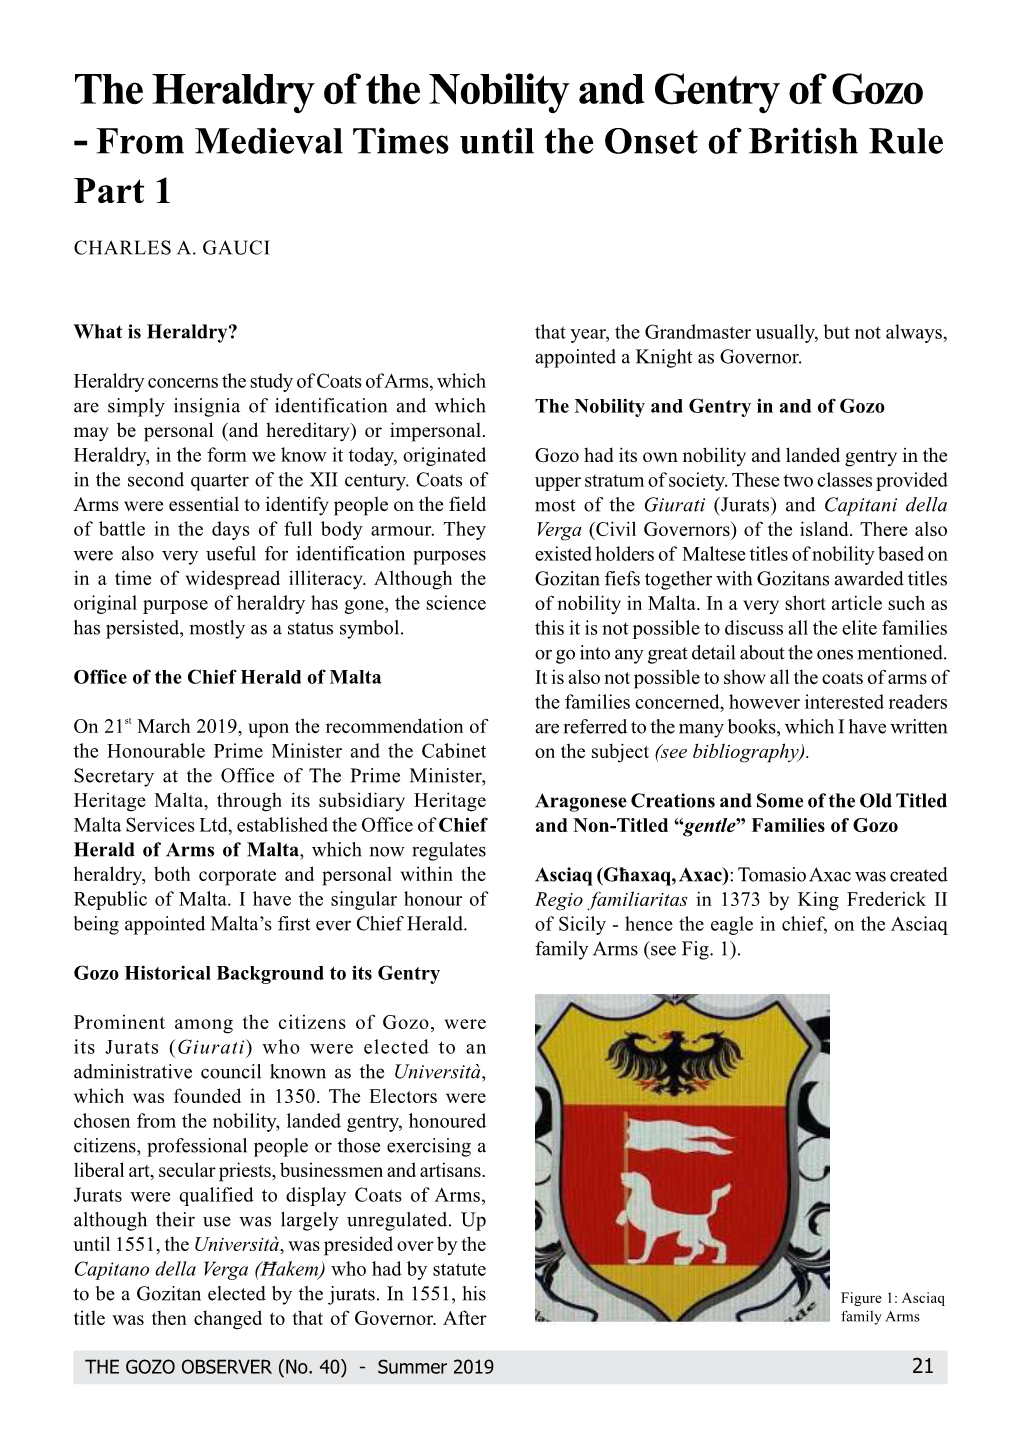 The Heraldry of the Nobility and Gentry of Gozo - from Medieval Times Until the Onset of British Rule Part 1